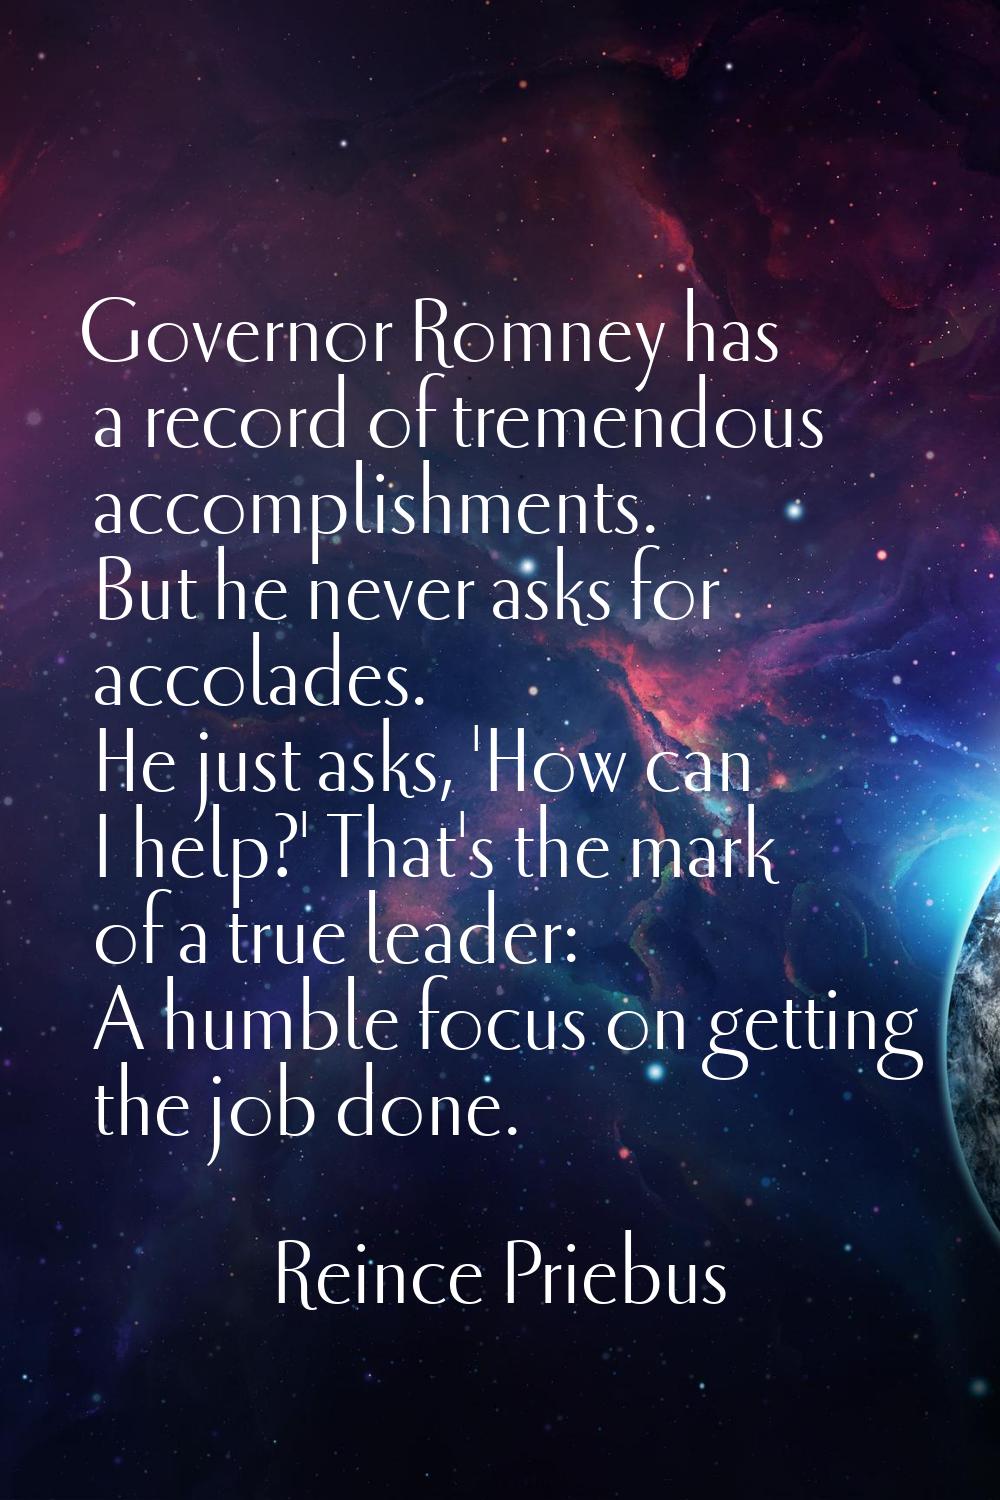 Governor Romney has a record of tremendous accomplishments. But he never asks for accolades. He jus